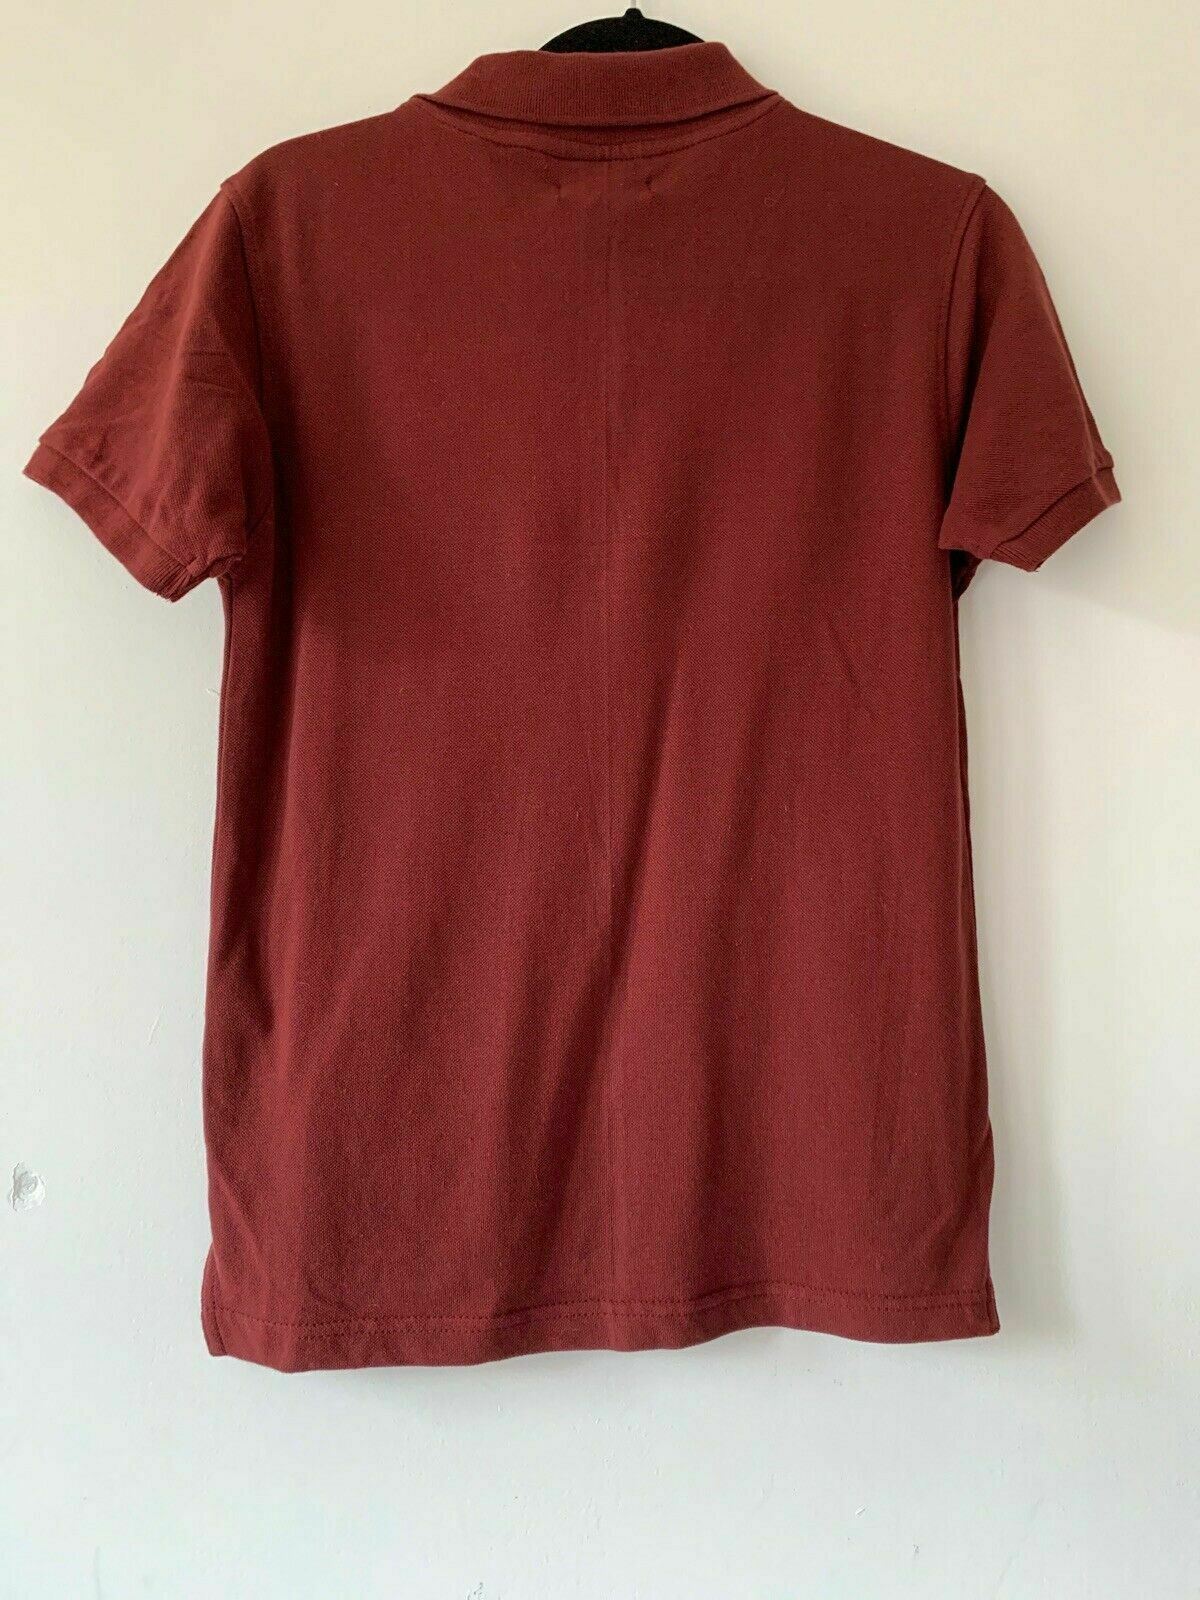 Mens Industrialize Polo shirt Top Maroon Size XS